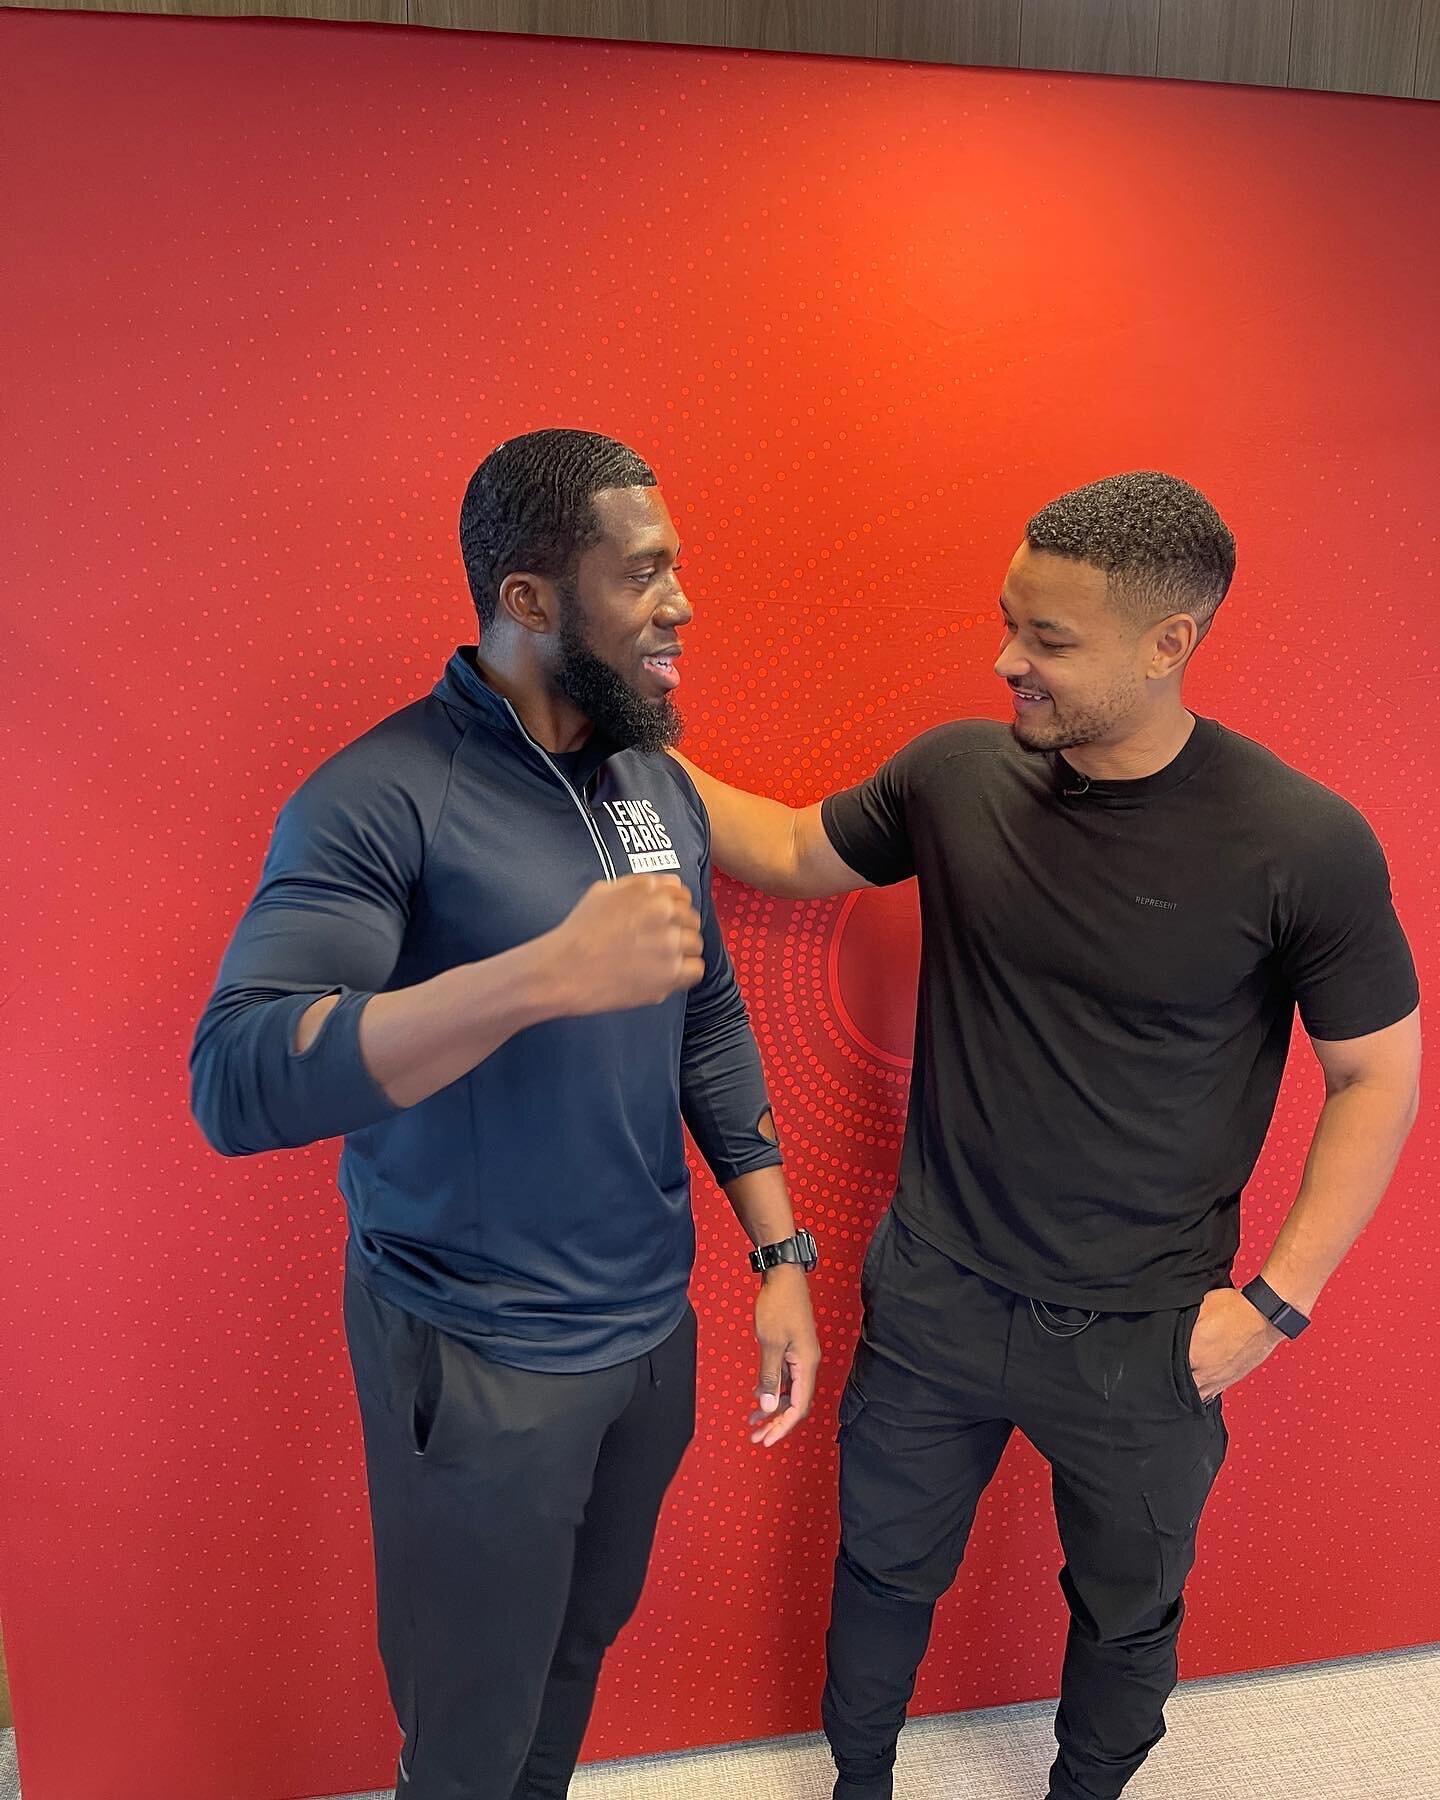 Taking the brand to new heights! 🚀

The boss shaking hands with influential people whilst rocking @thelpfcollection Cool Flex Half Zip Top 👕👌🏾

@lewisparisfitness will continue to expand its network and inspire the nation one person at a time.. I